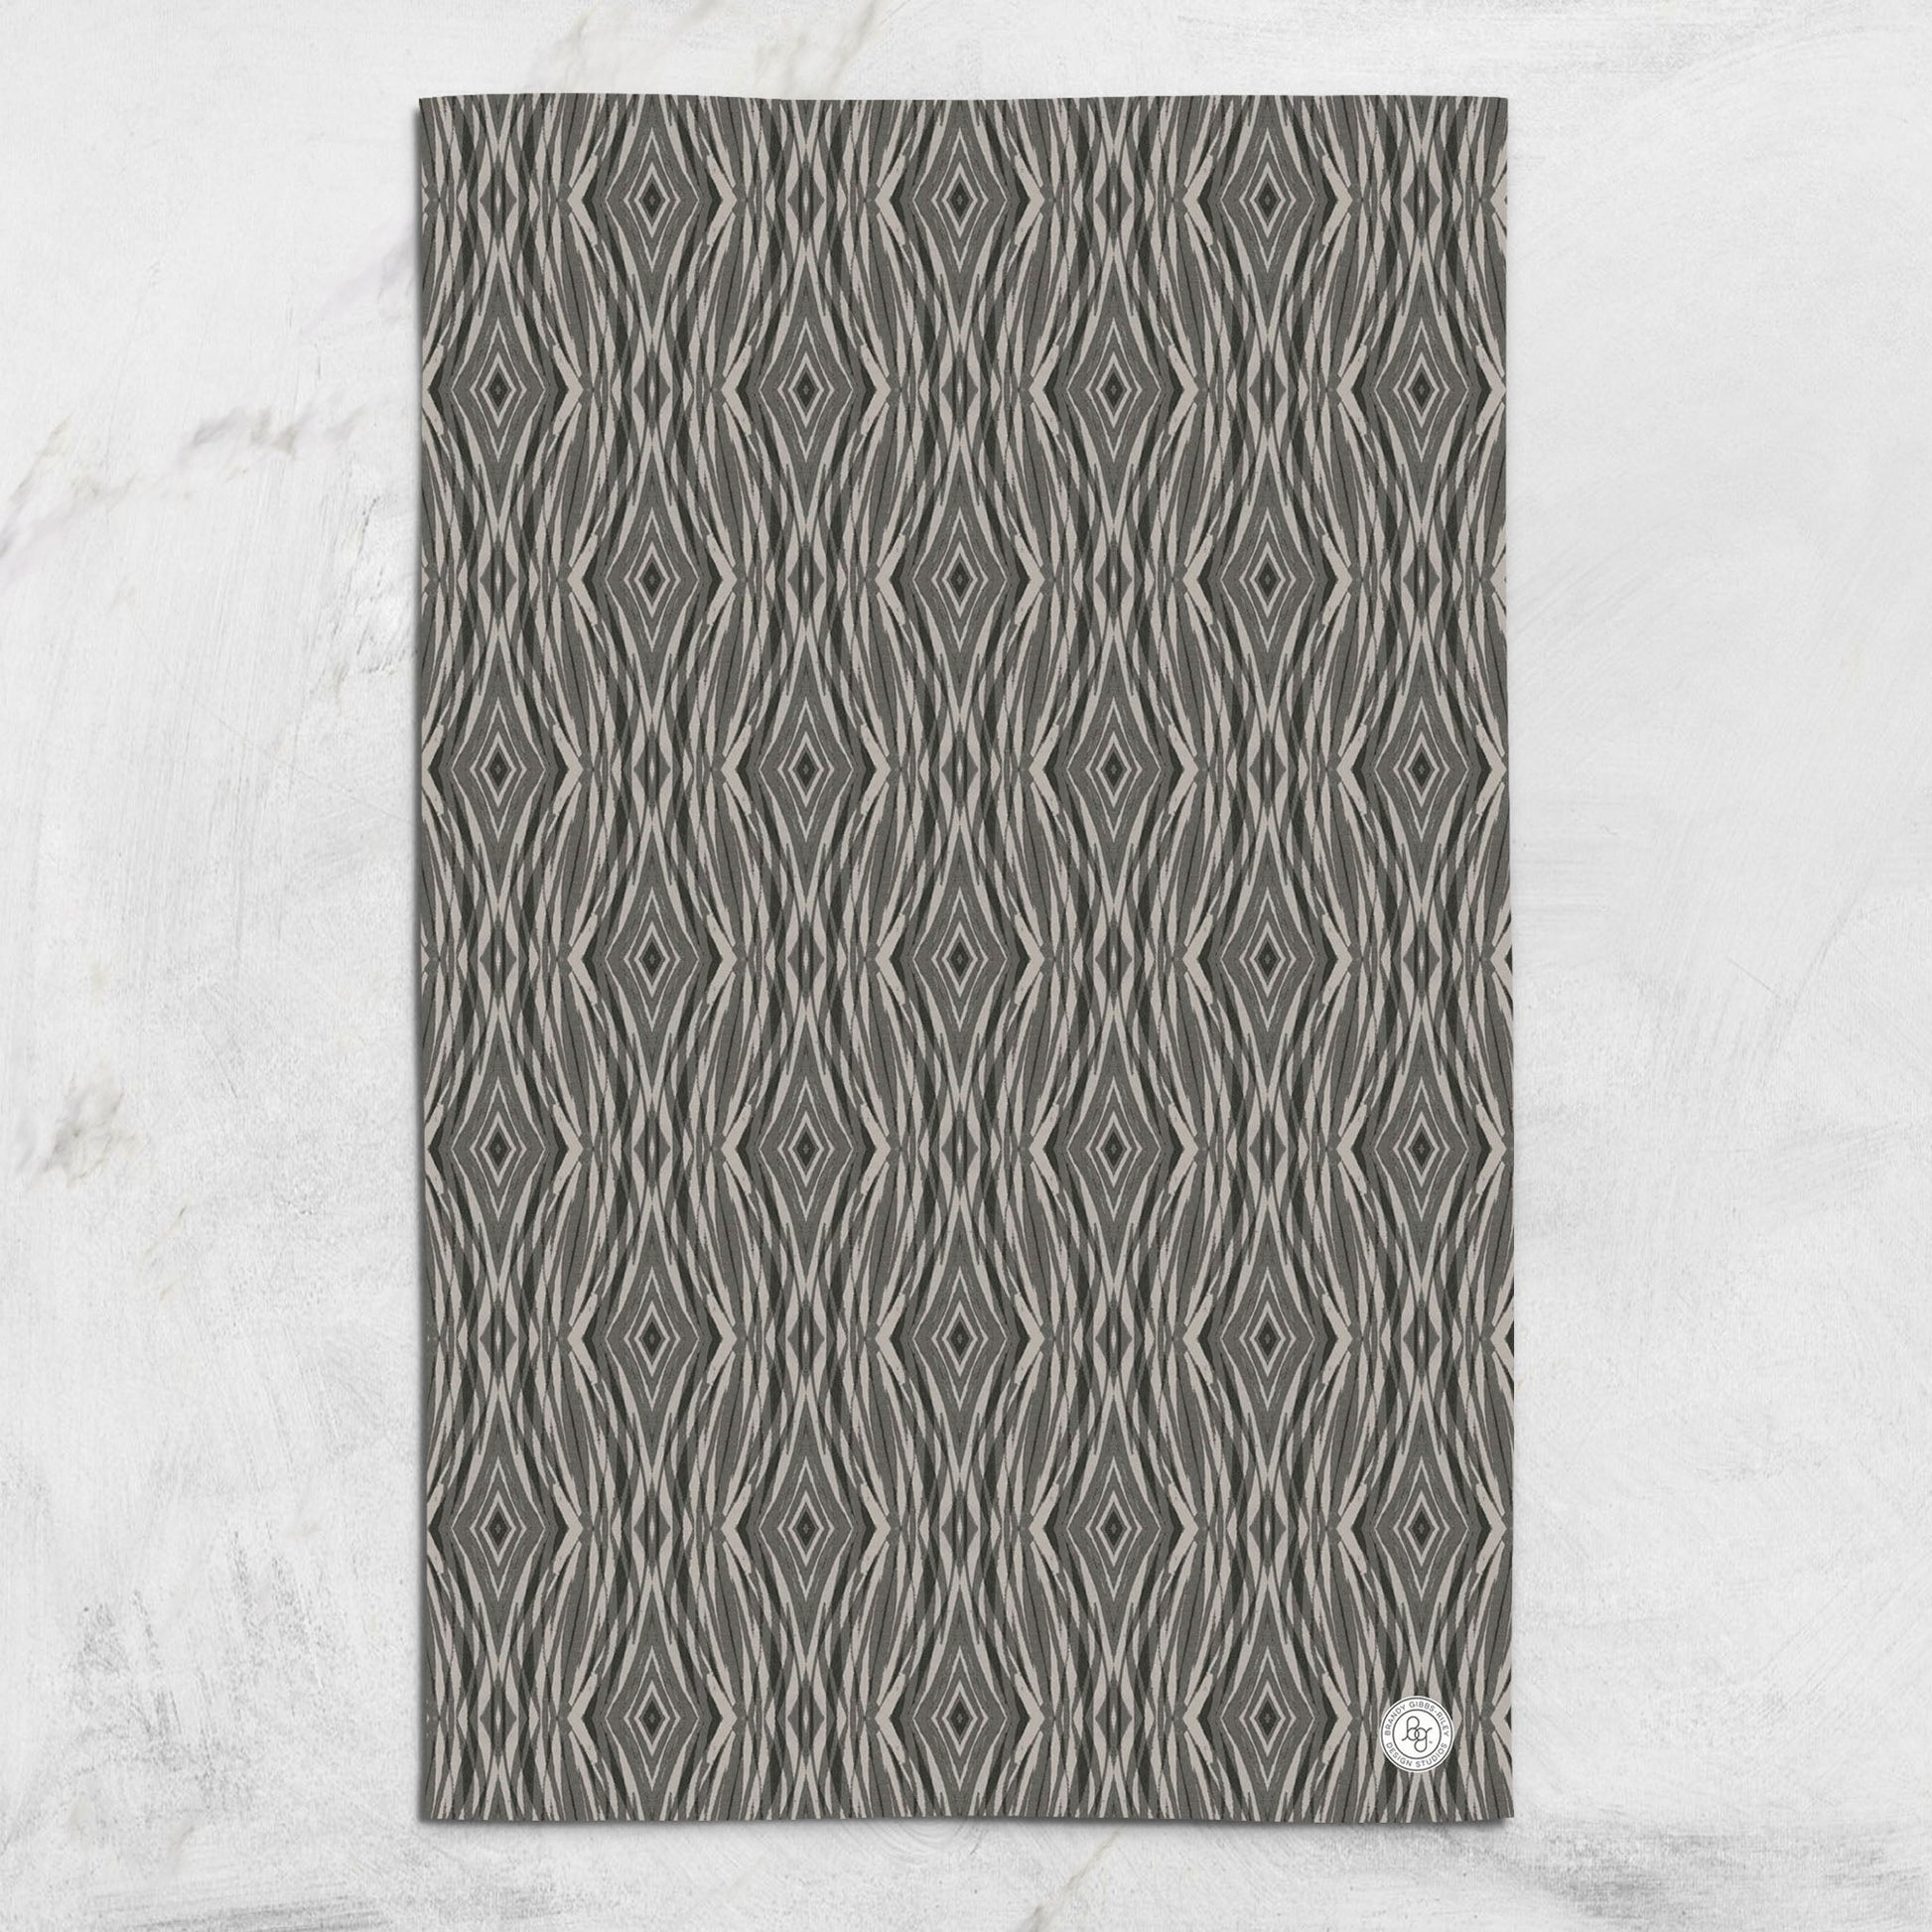 Organic cotton hemp tea towel featuring a hand-designed, linocut abstract pattern in grey and beige.